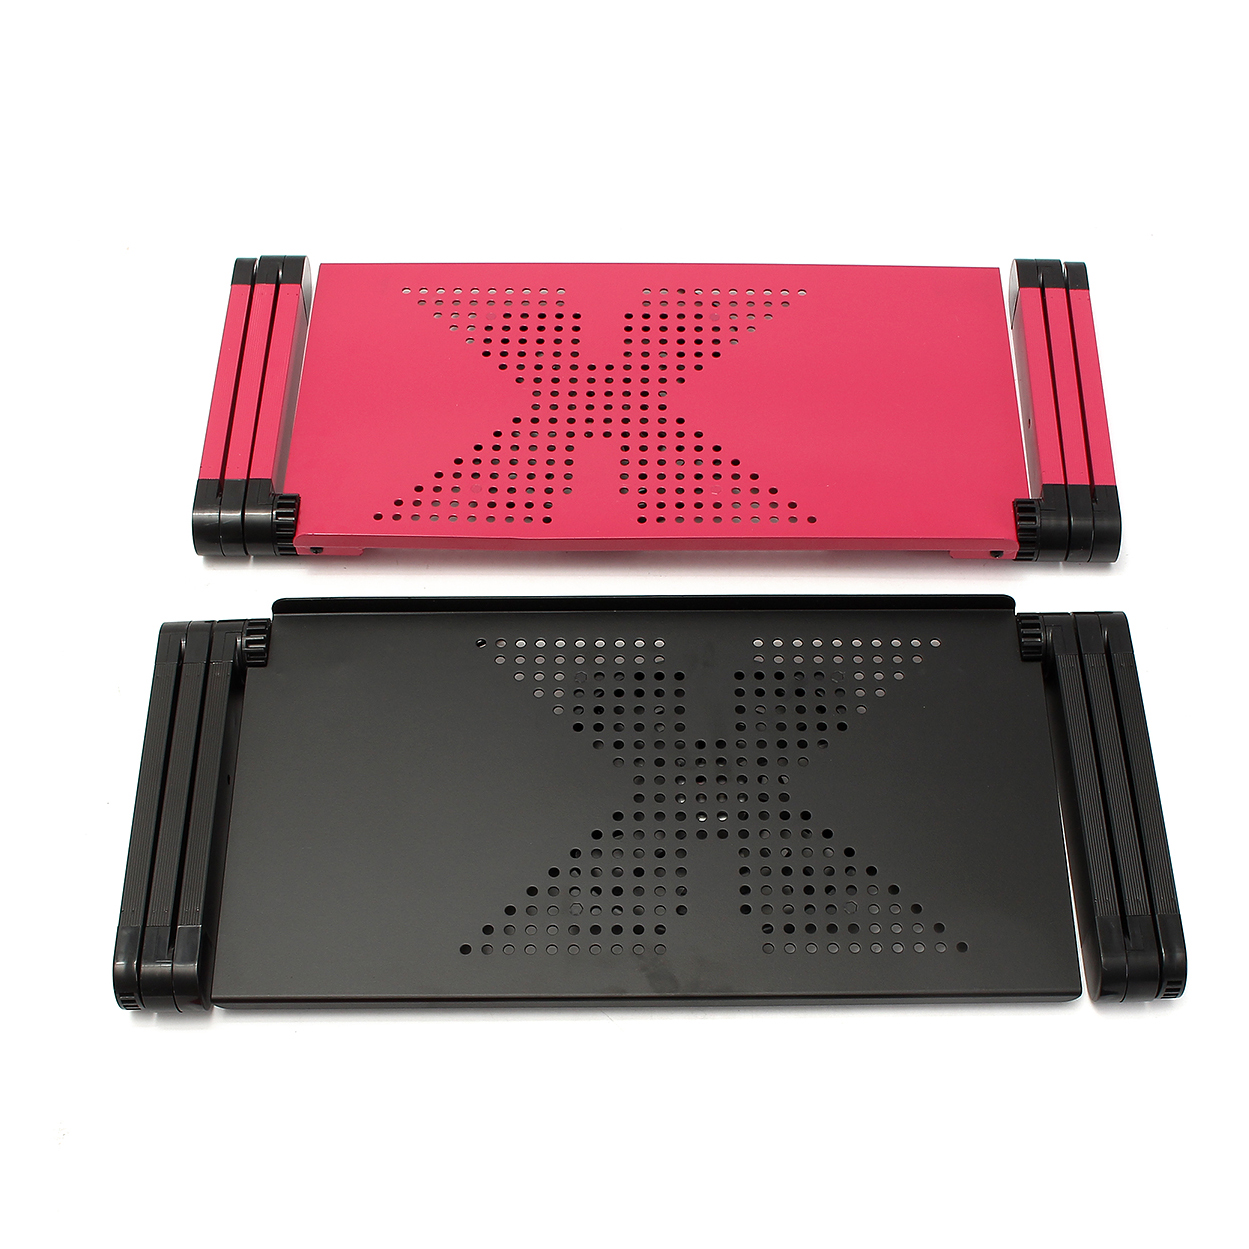 Find Adjustable Laptop Desk Laptop stand Portable Foldable Stand Bed Tray Laptop with Cooling Fan for up to 17 Inches for Sale on Gipsybee.com with cryptocurrencies